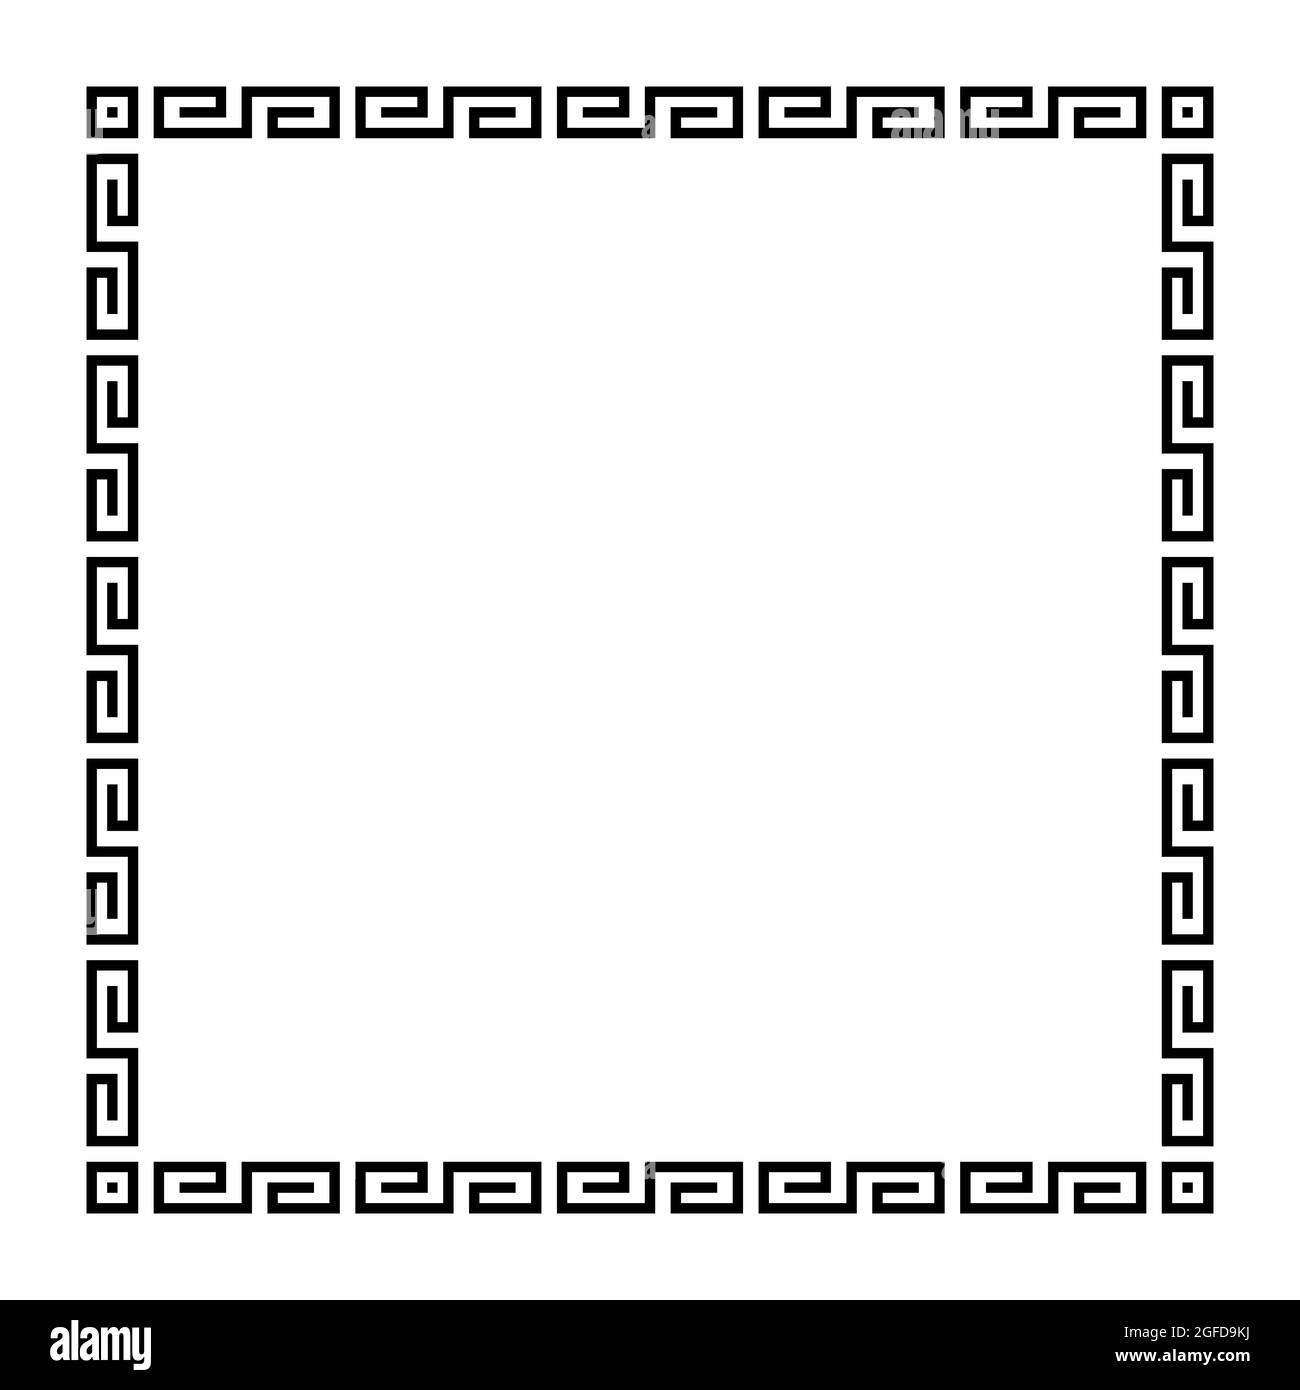 Meander square with simple meander pattern. Square frame and decorative border, made of angular spirals, shaped into a seamless motif. Greek key. Stock Photo